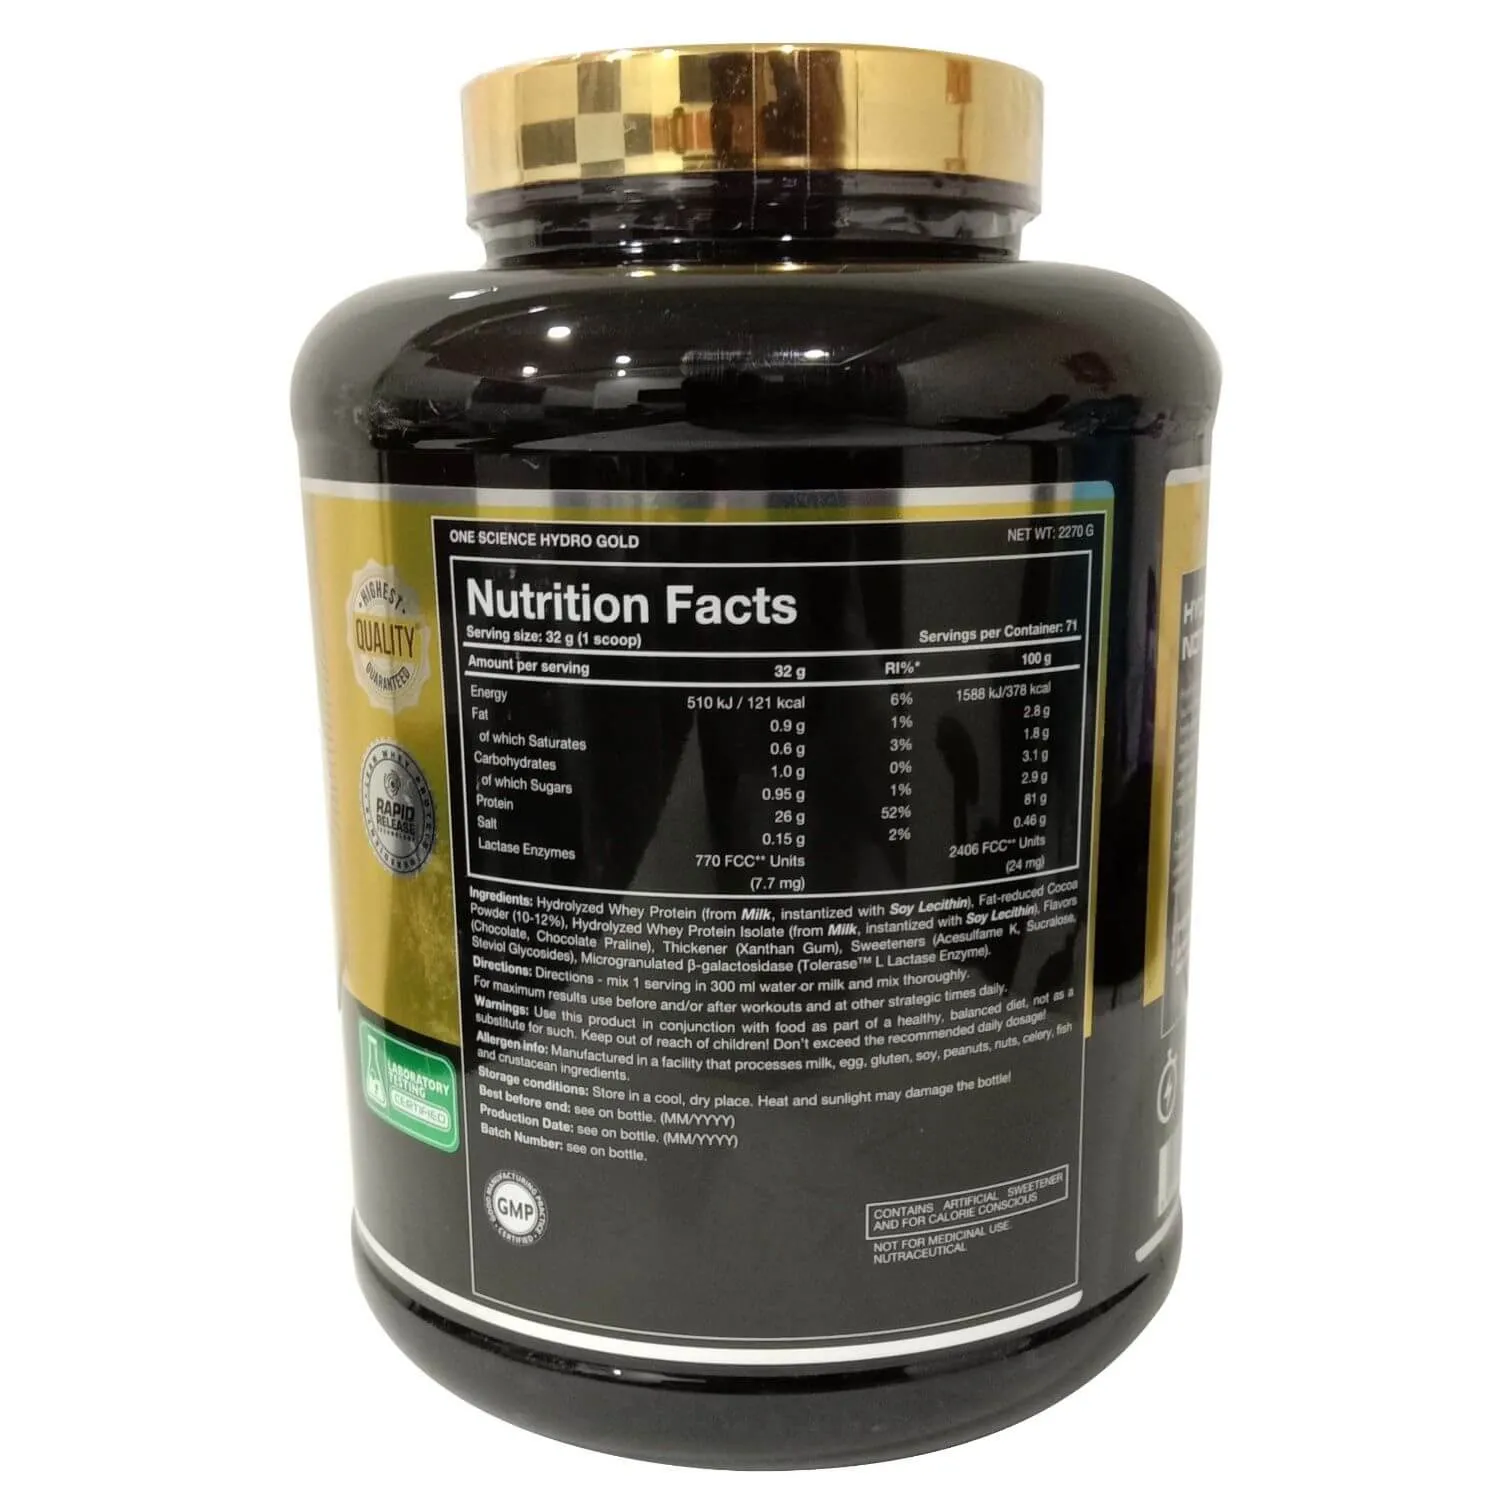 One Science Nutrition (OSN) HYDRO GOLD Protein Powder